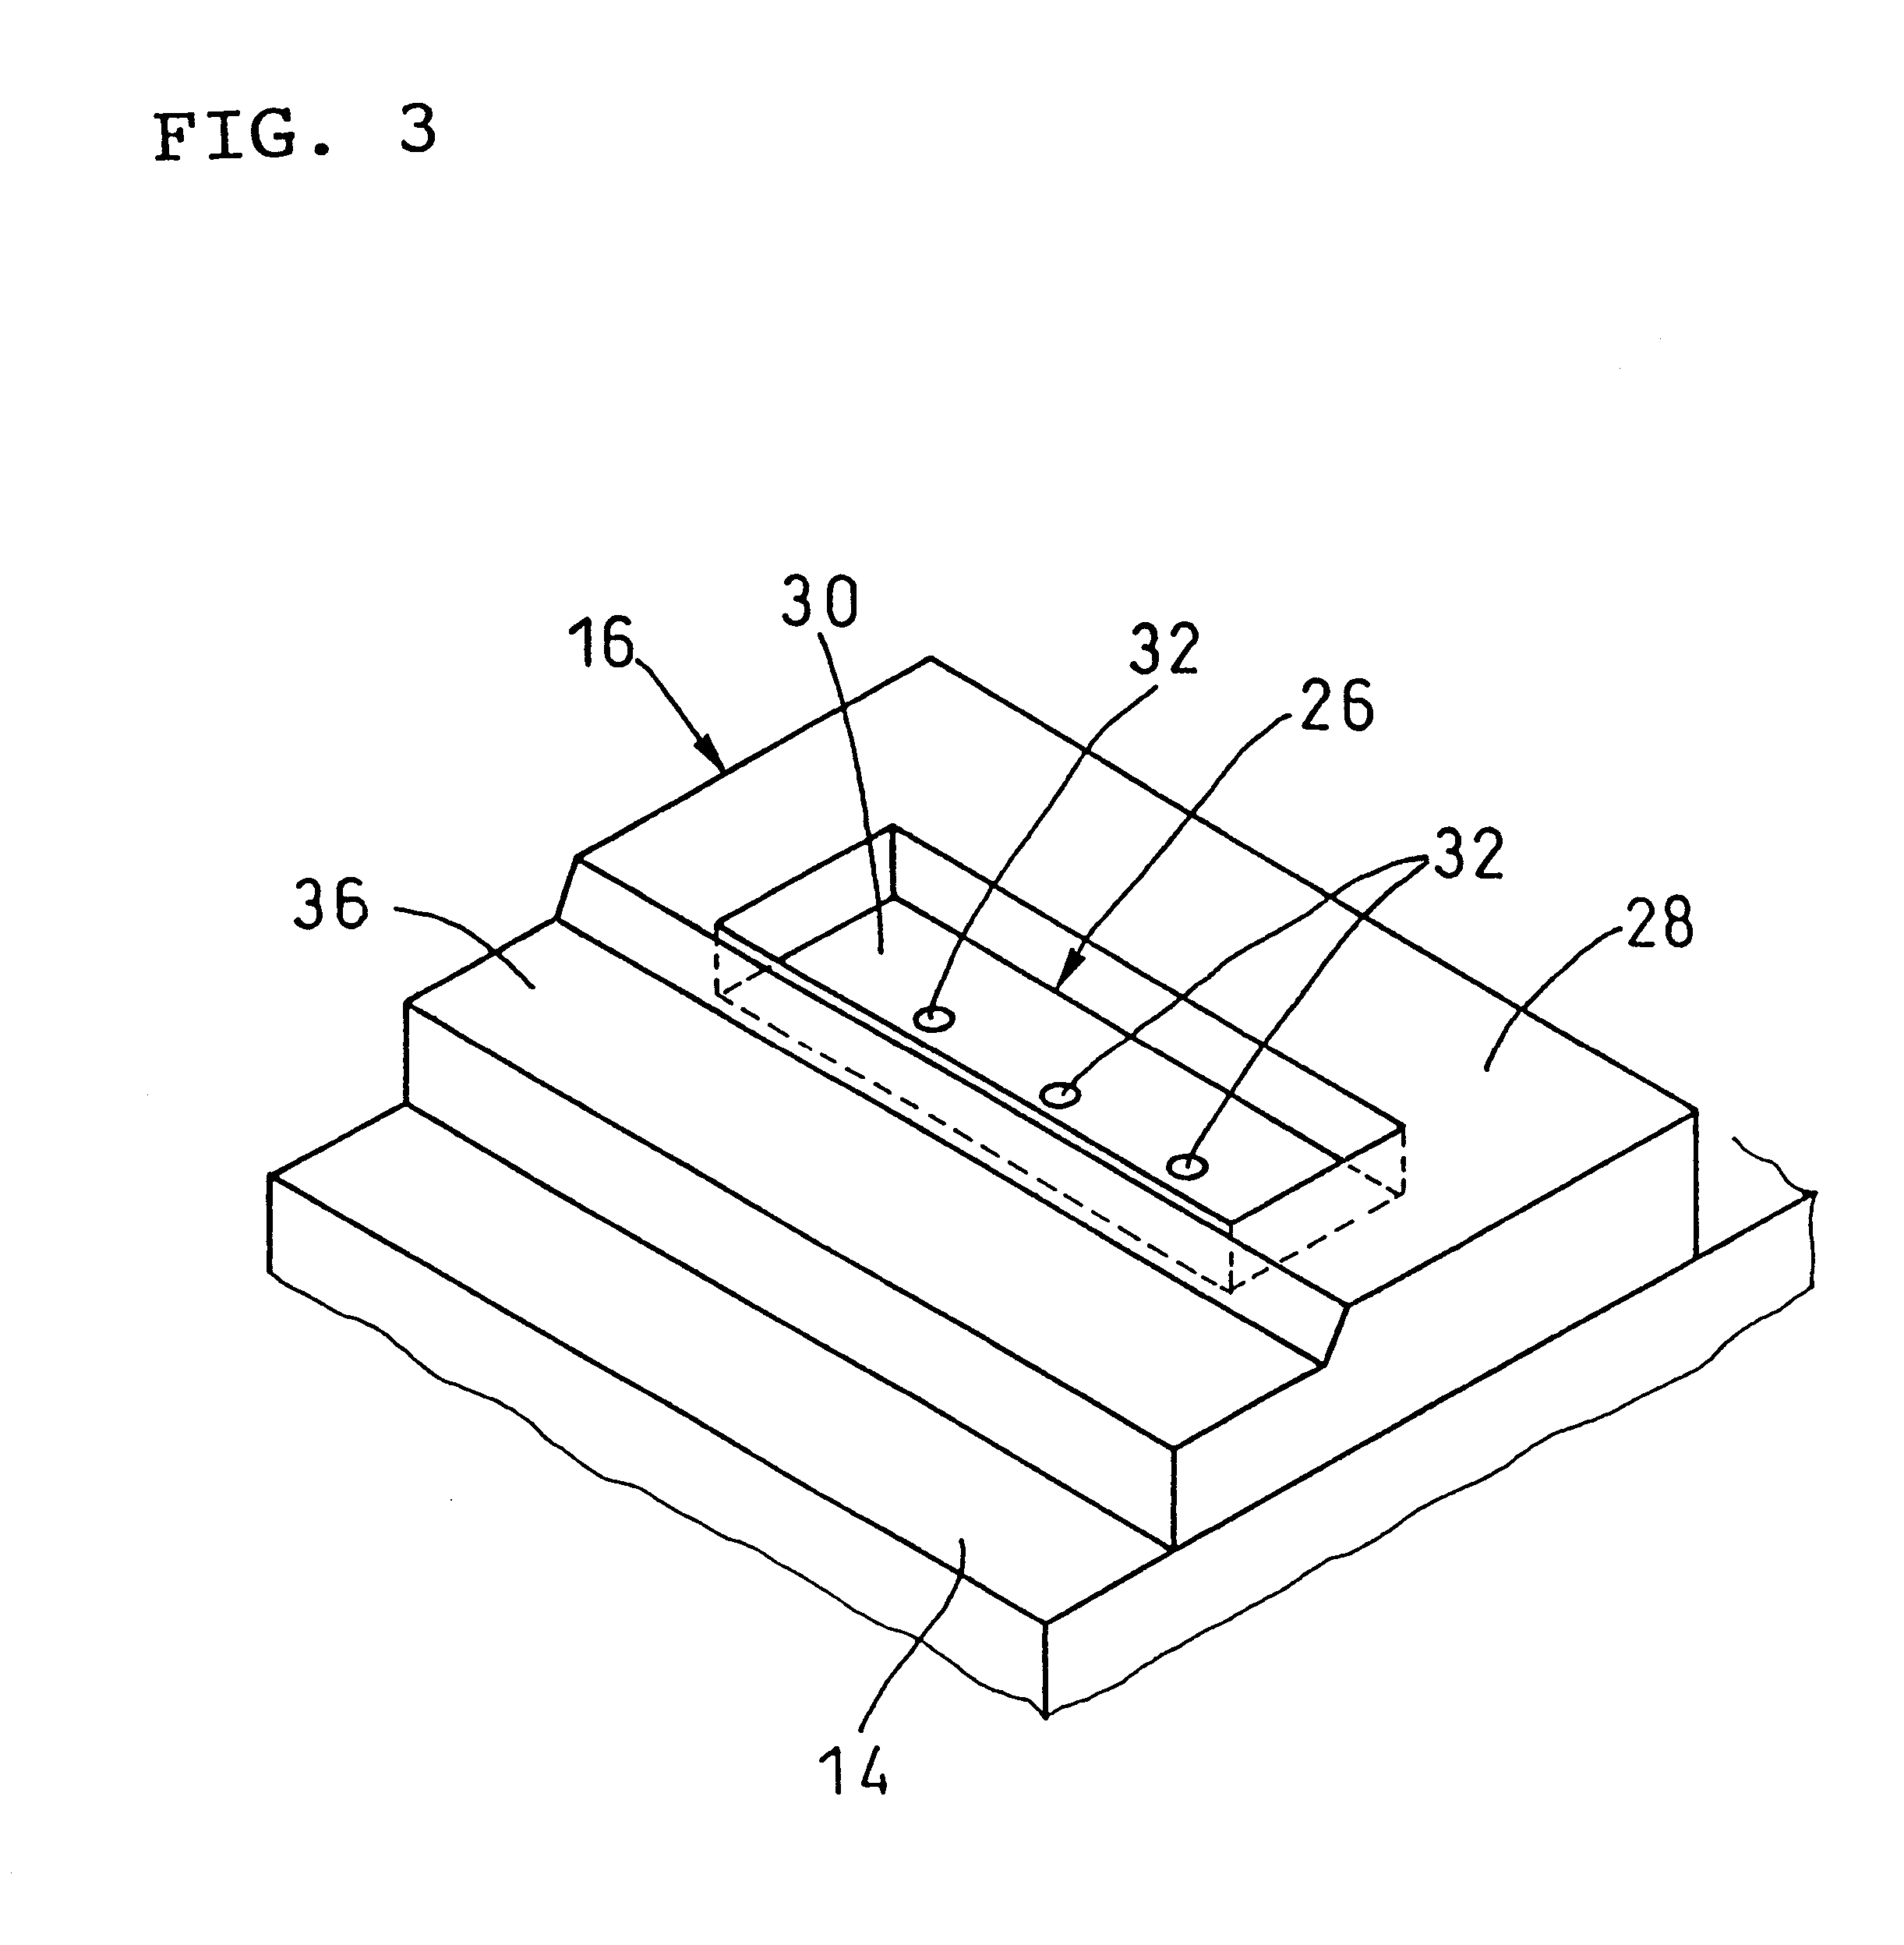 Solder bump forming method and apparatus